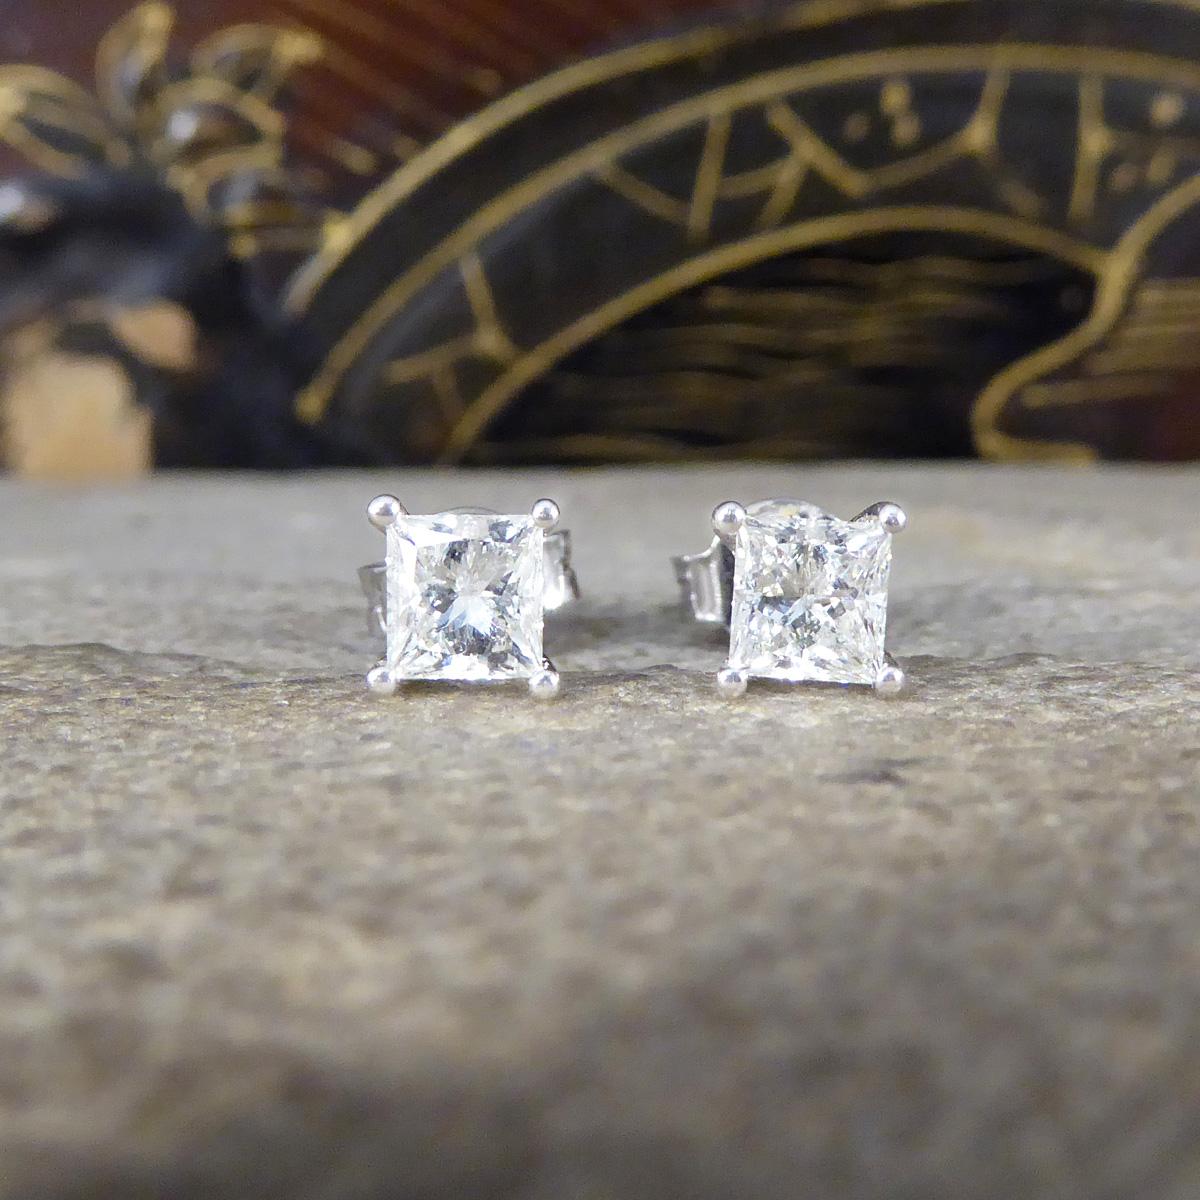 A lovely piece that will stand the test of time and the perfect addition to any outfit. These beautiful Diamond stud earrings have been set with a single Princess Cut Diamond in a four claw setting allowing lots of light to pass through creating